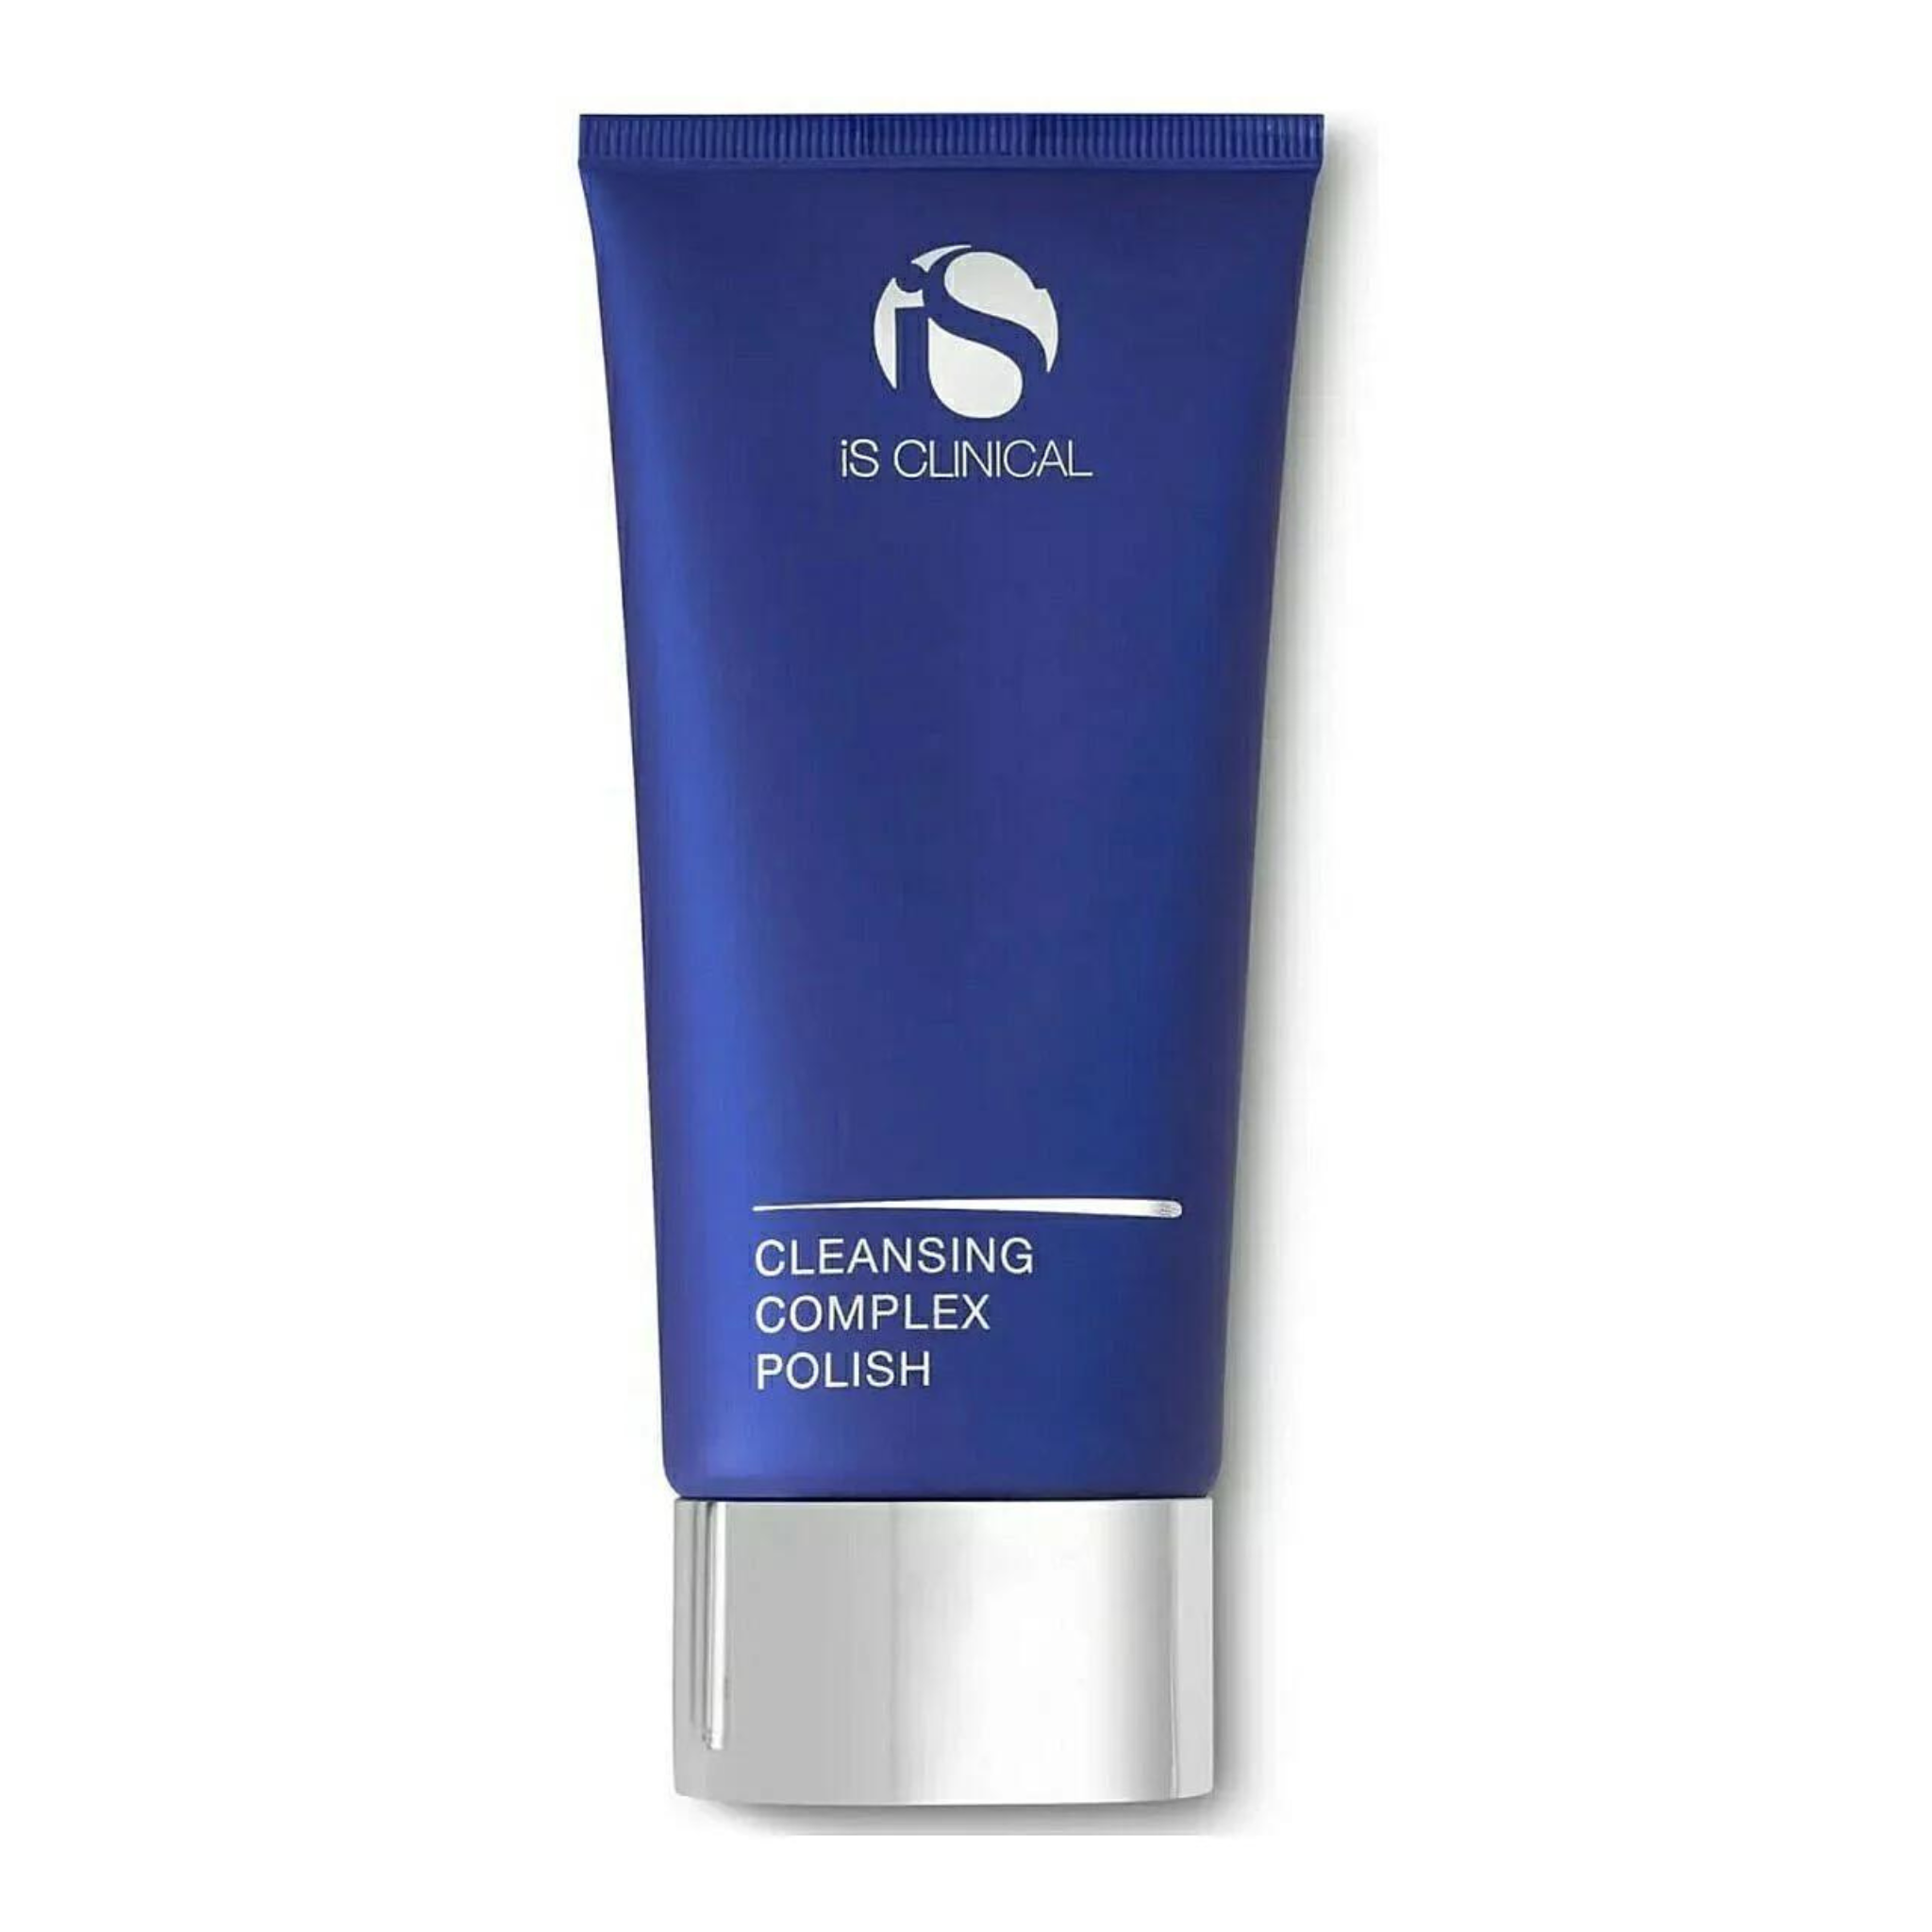 Cleansing Complex Polish - iS Clinical